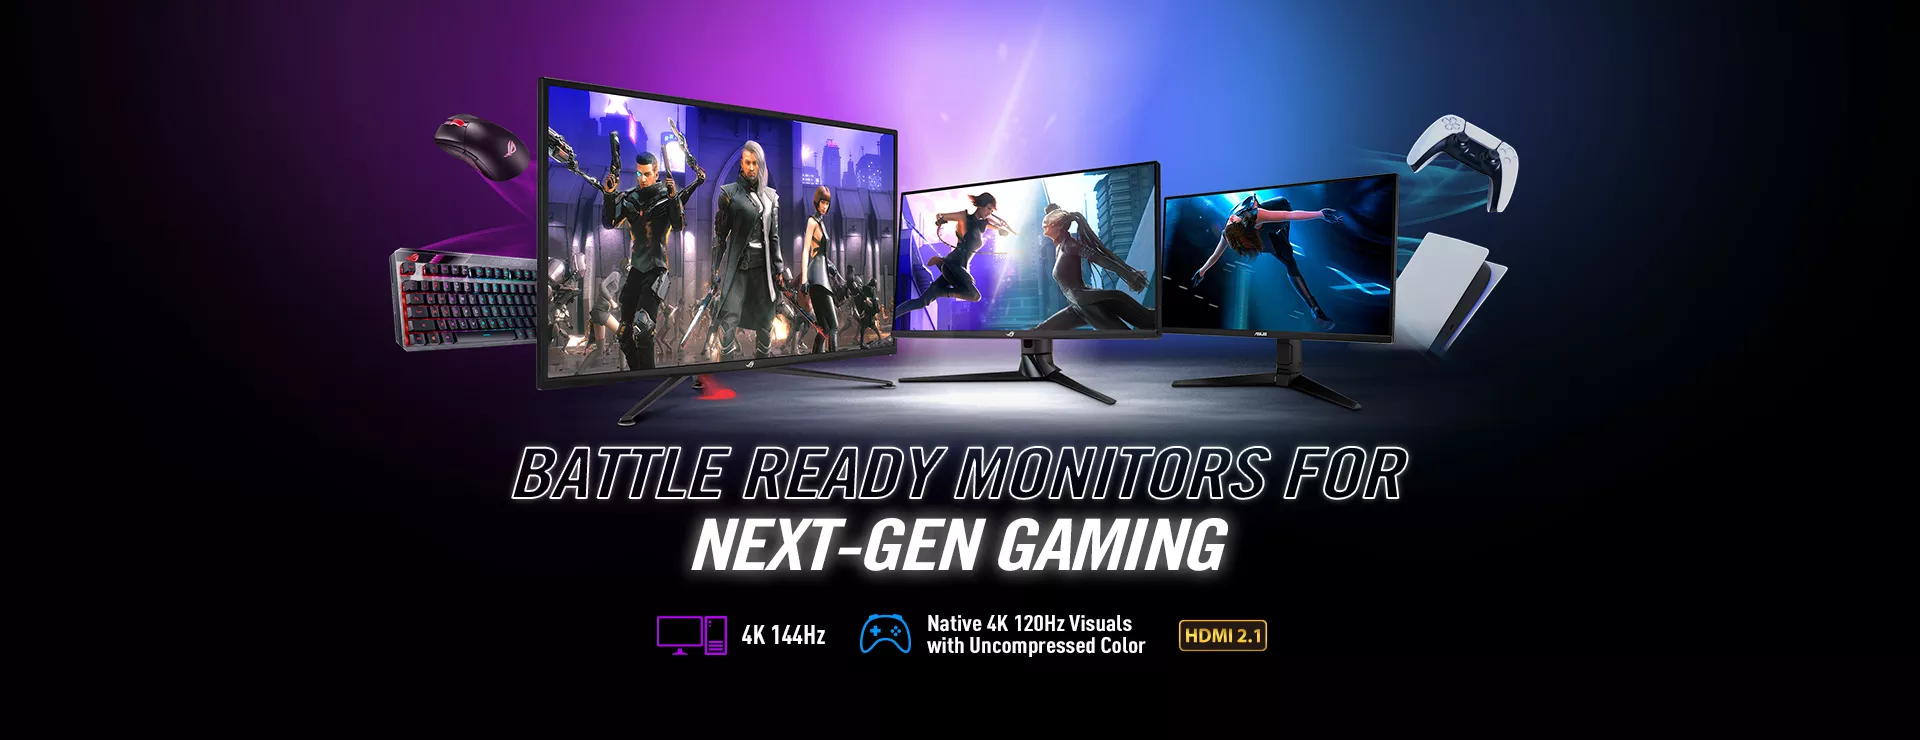 ROG and TUF Gaming ture HDMI 2.1 series monitor lineup photo with compatible game console, gaming keyboard and gaming mouse in the background